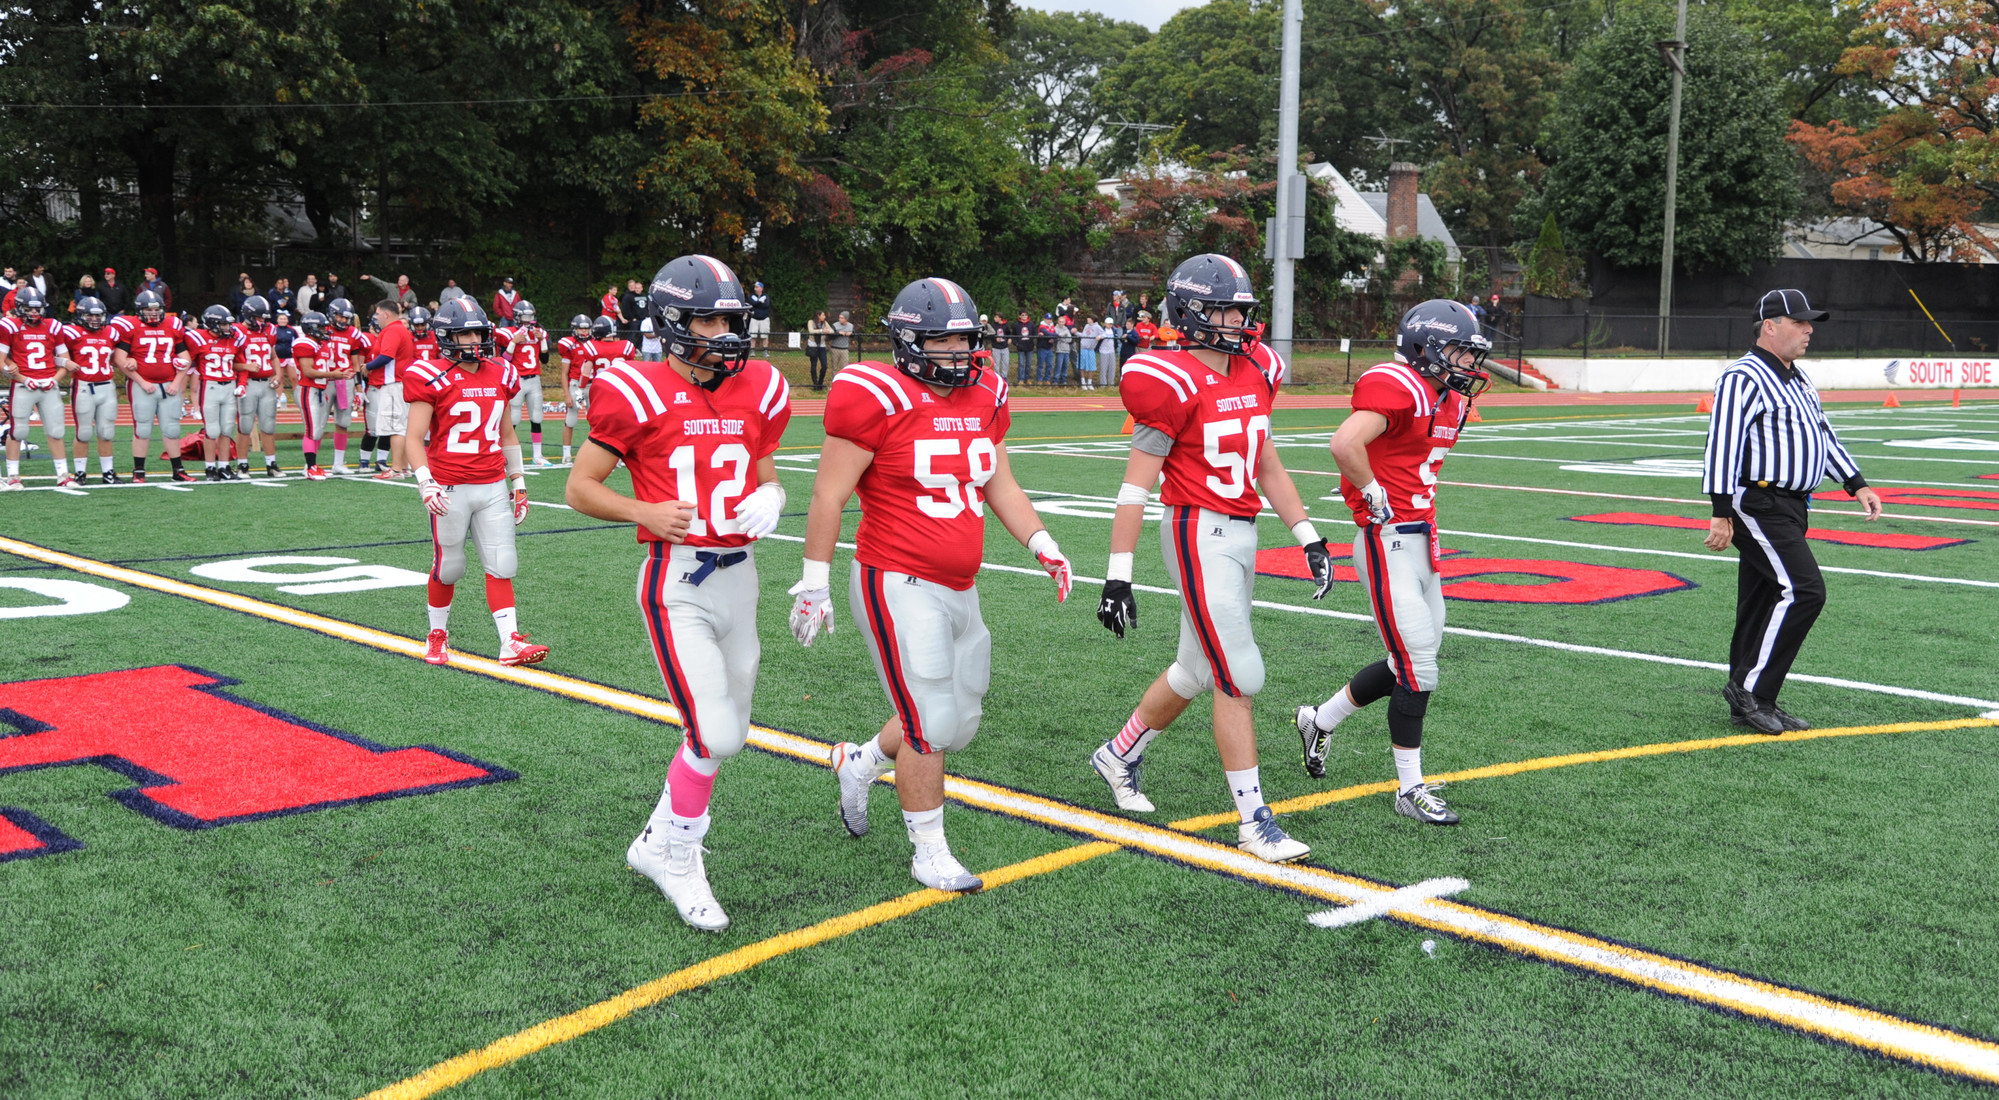 Nick DiMare, left, Jason Dantona, Kyle McWalters and Stephen Parker led the Cyclones out for the opening game against Division.